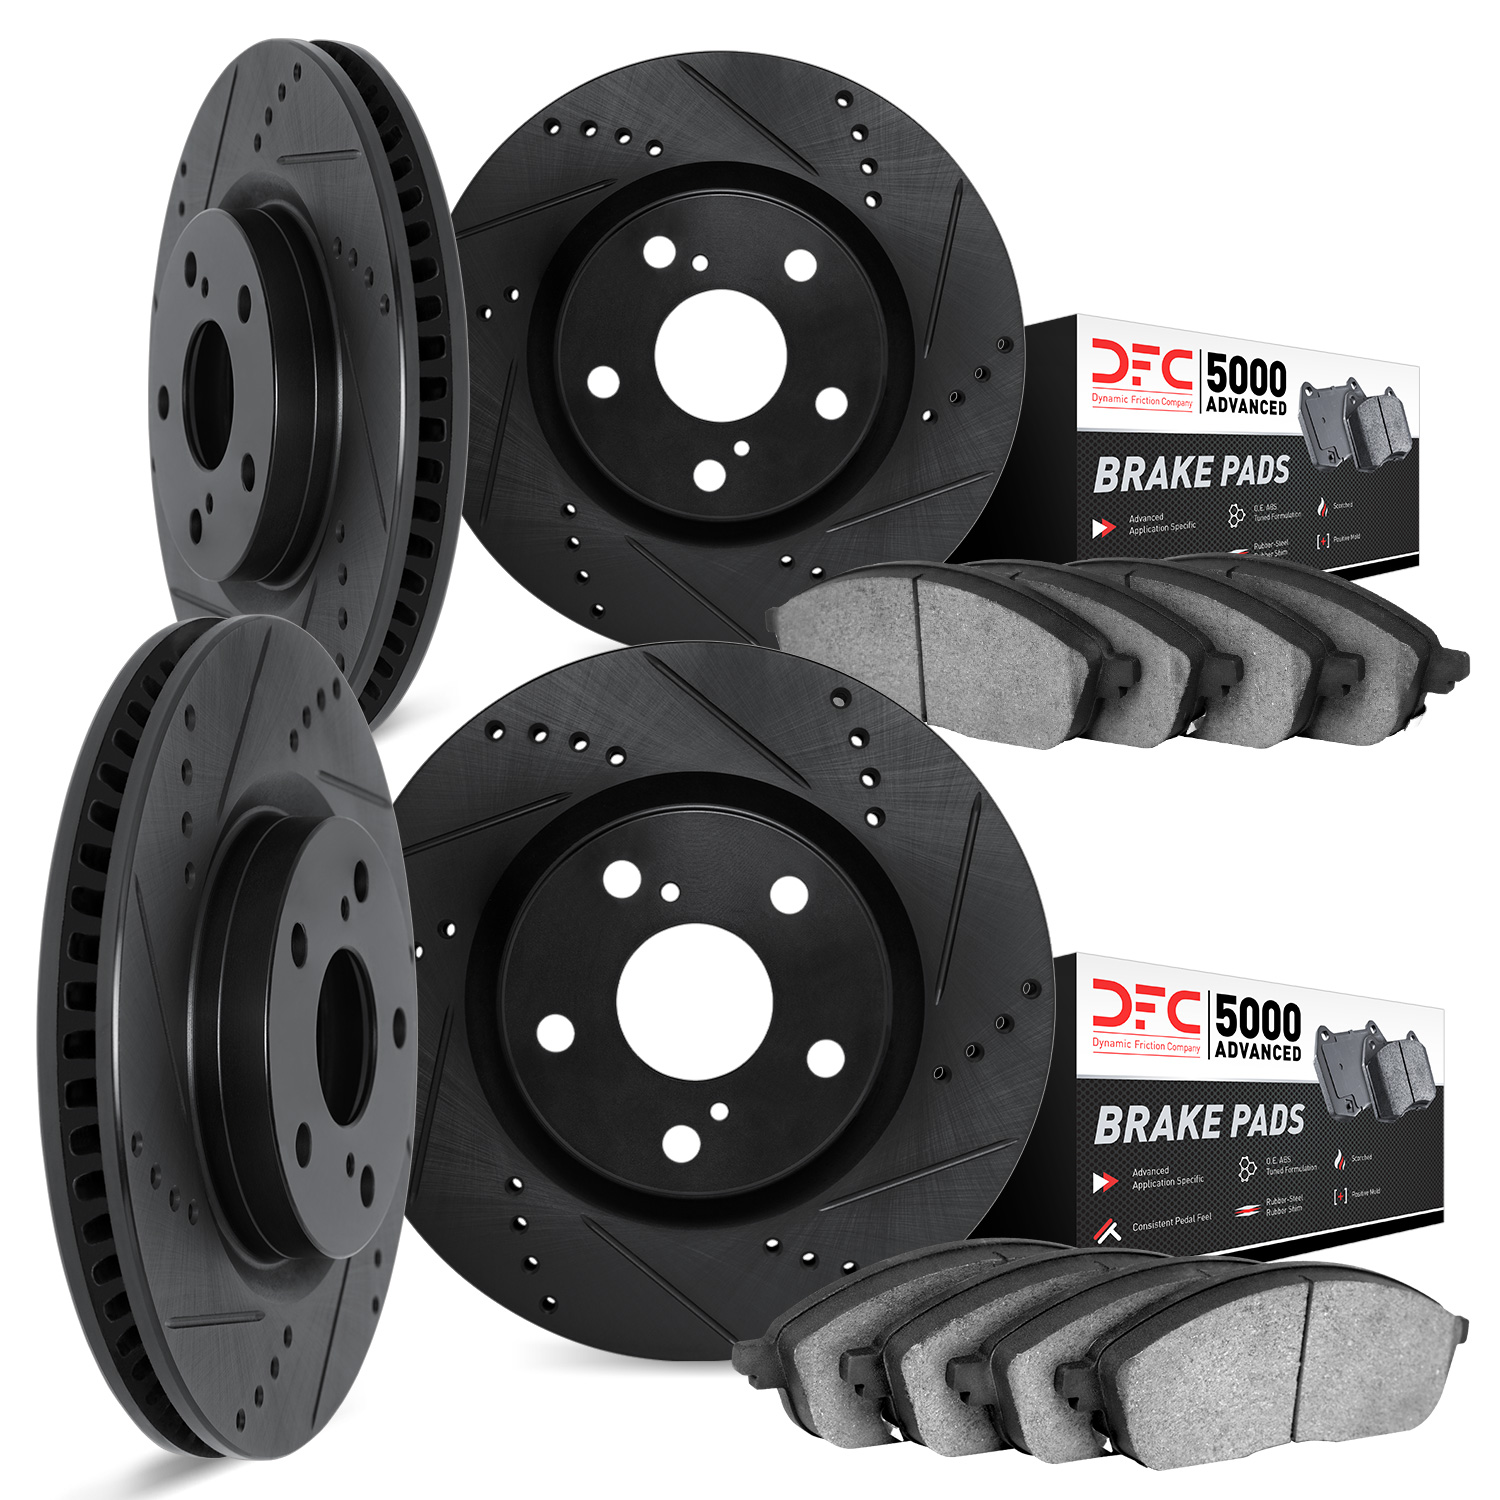 8504-11008 Drilled/Slotted Brake Rotors w/5000 Advanced Brake Pads Kit [Black], 2005-2009 Land Rover, Position: Front and Rear